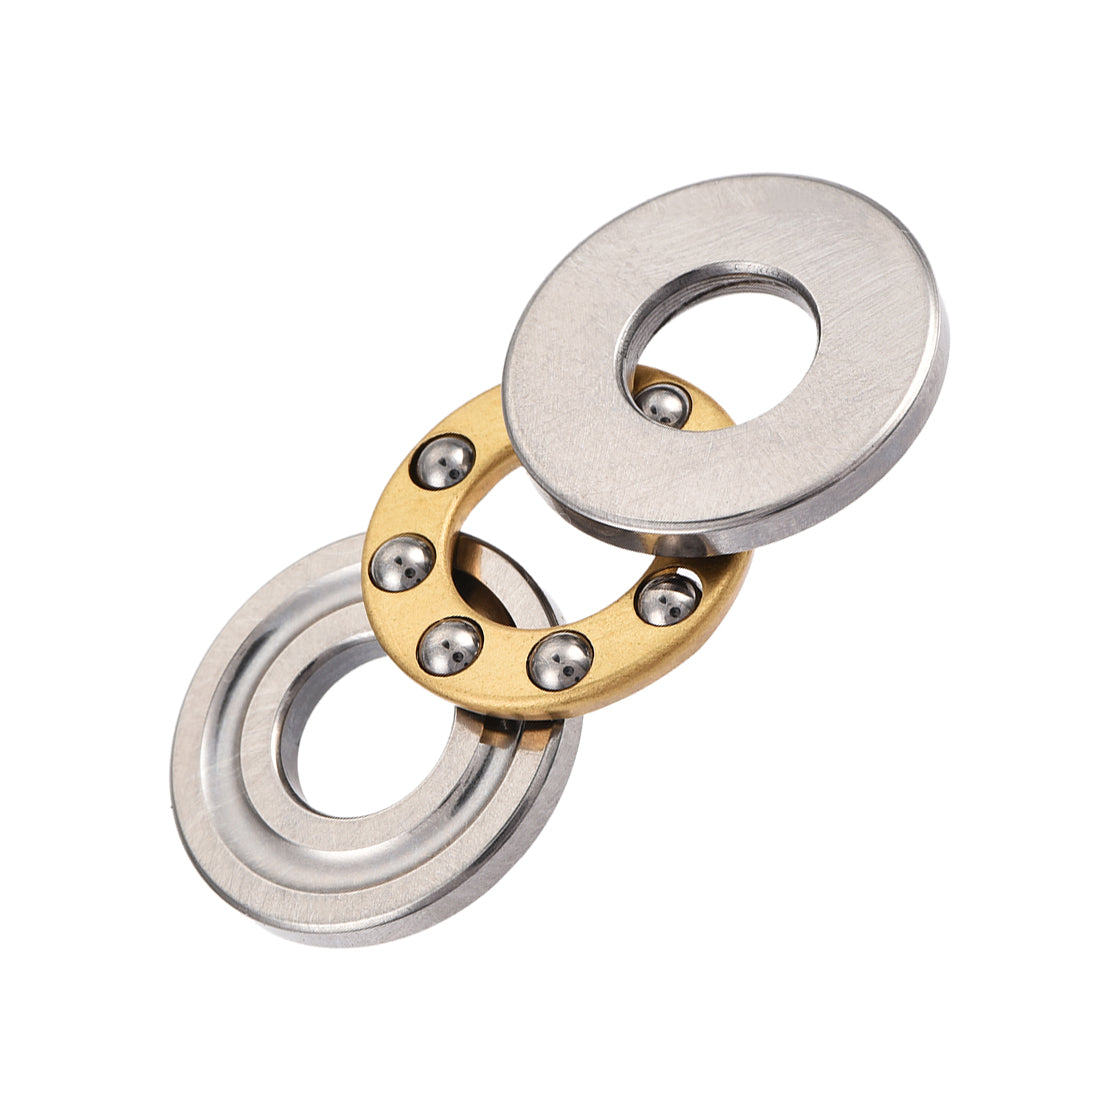 uxcell Uxcell Thrust Ball Bearings Chrome Steel One-Way Rolling Direction Brass Cage